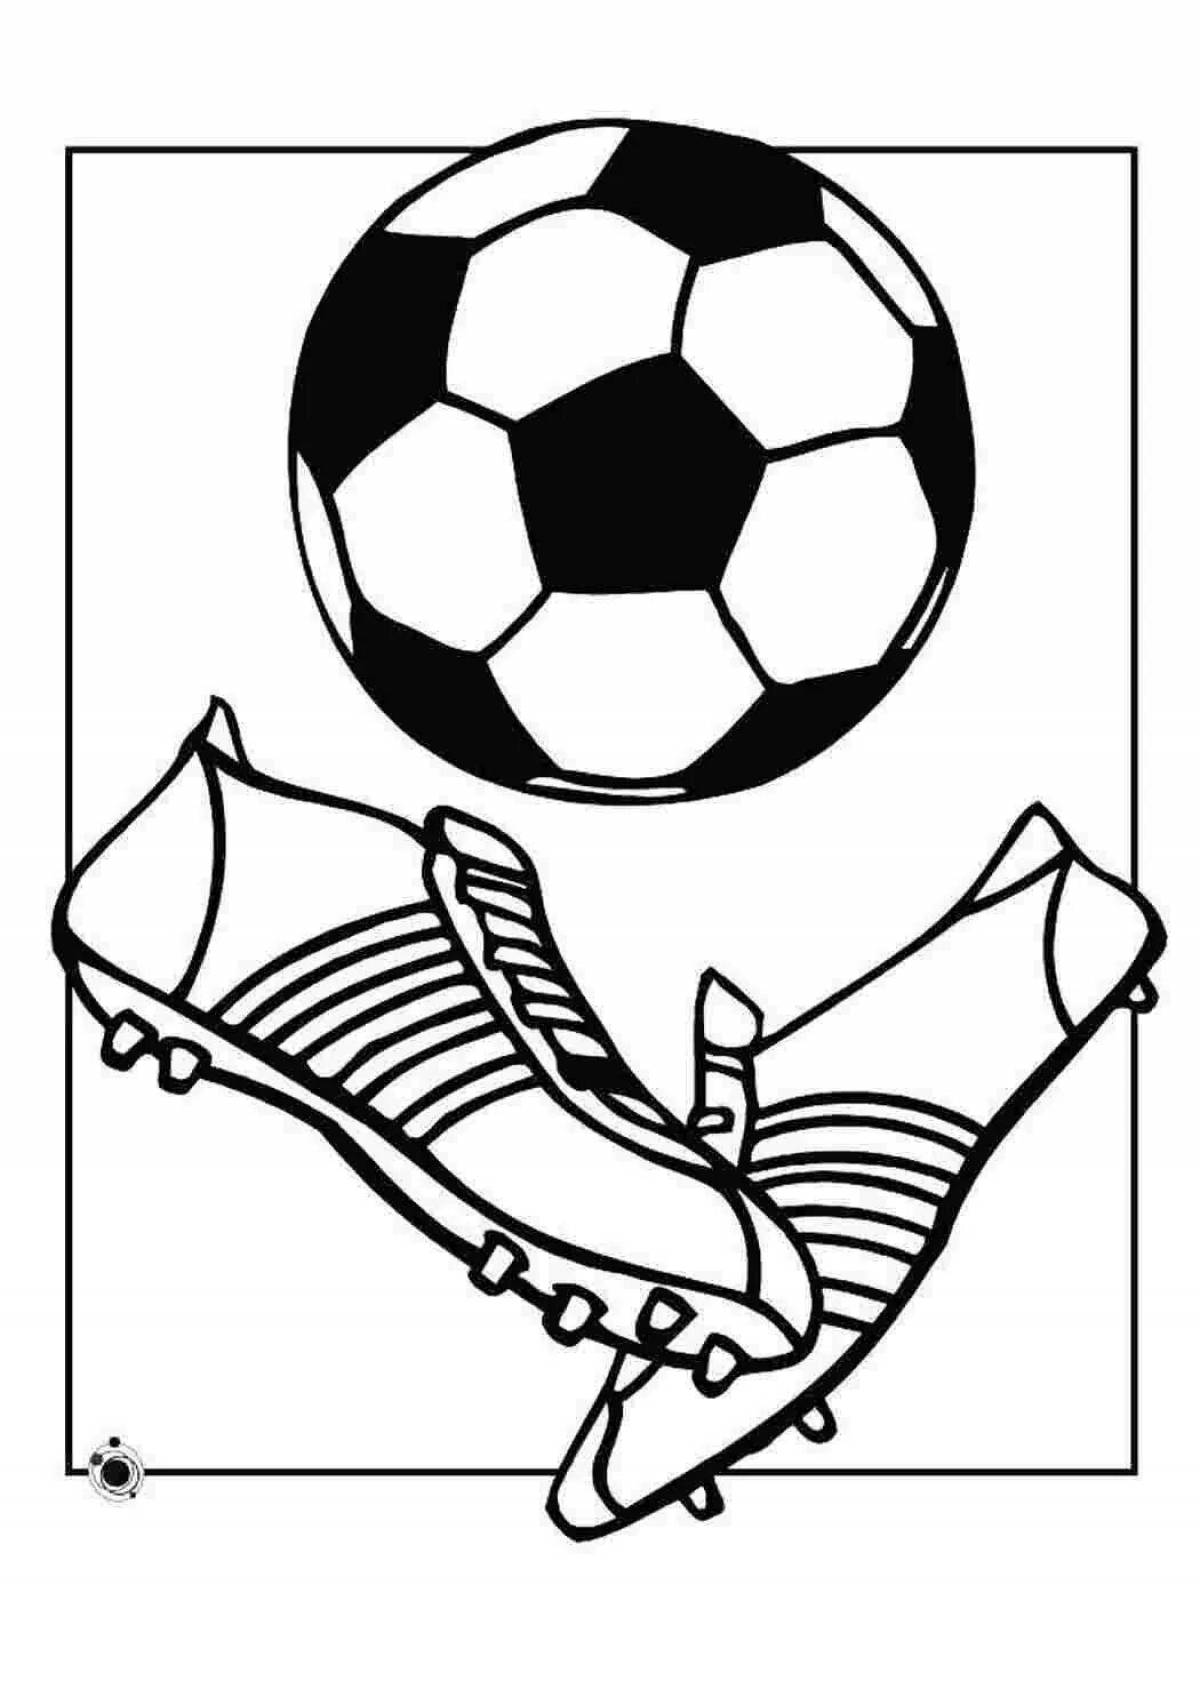 Coloring page unique football boots